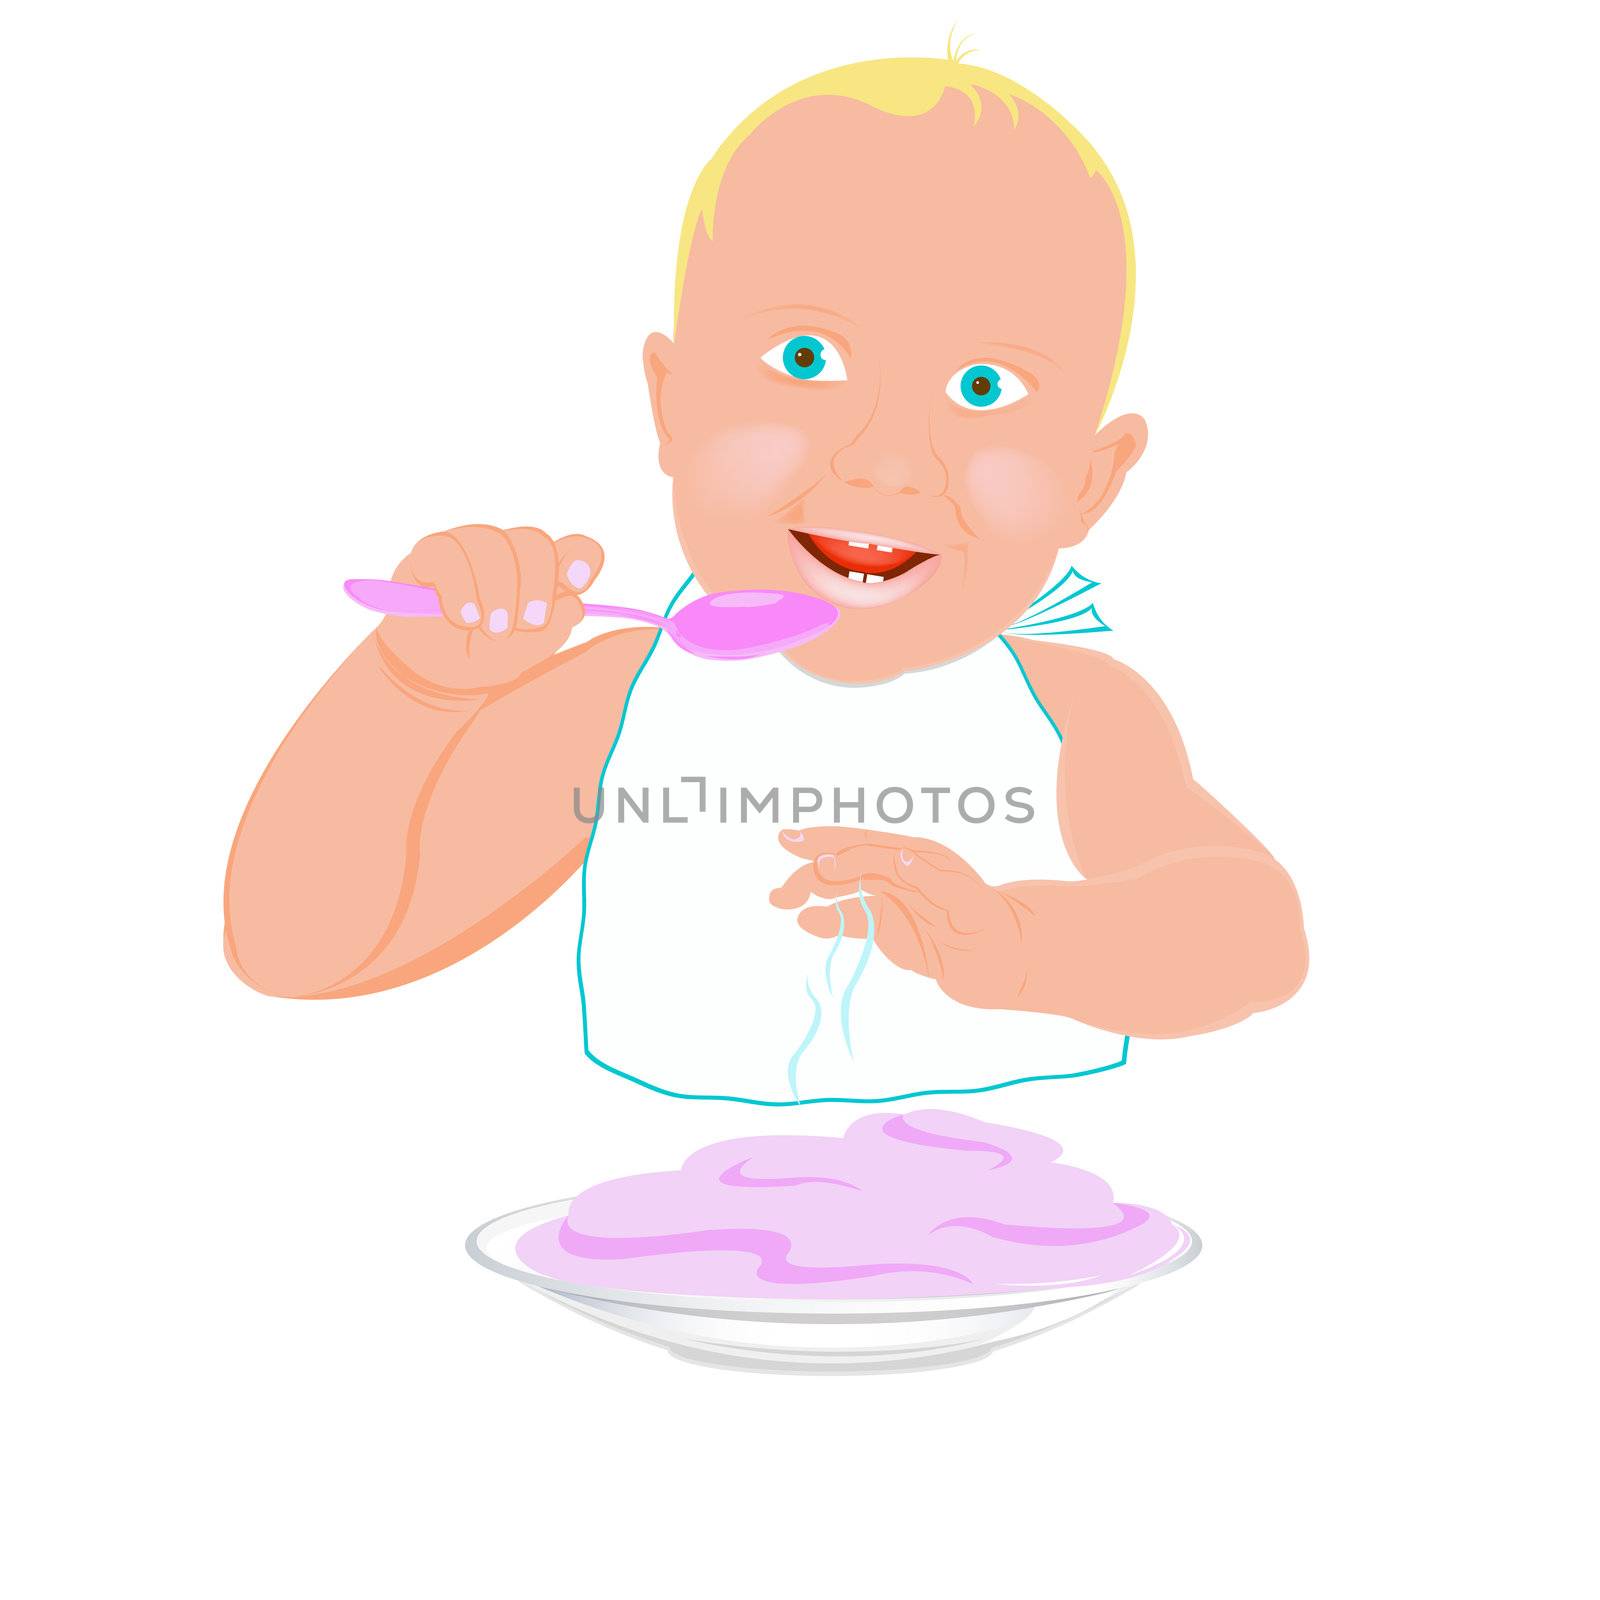 Healthy nutrition food for baby